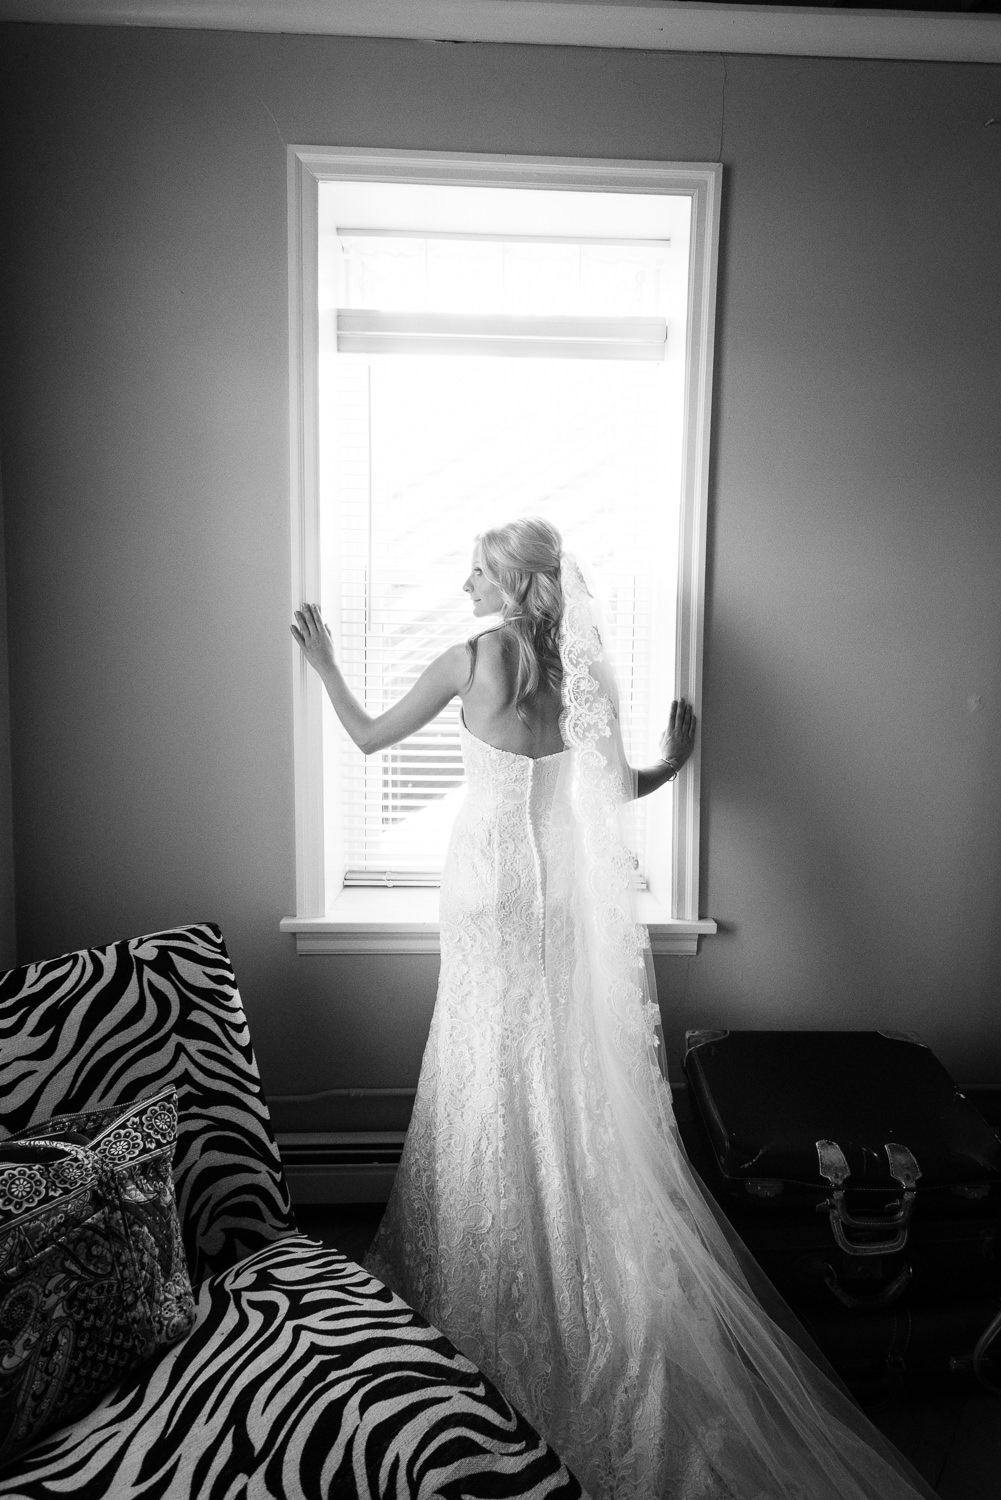 Grant Beachy midwest wedding photography south bend, goshen, chicago-039.jpg